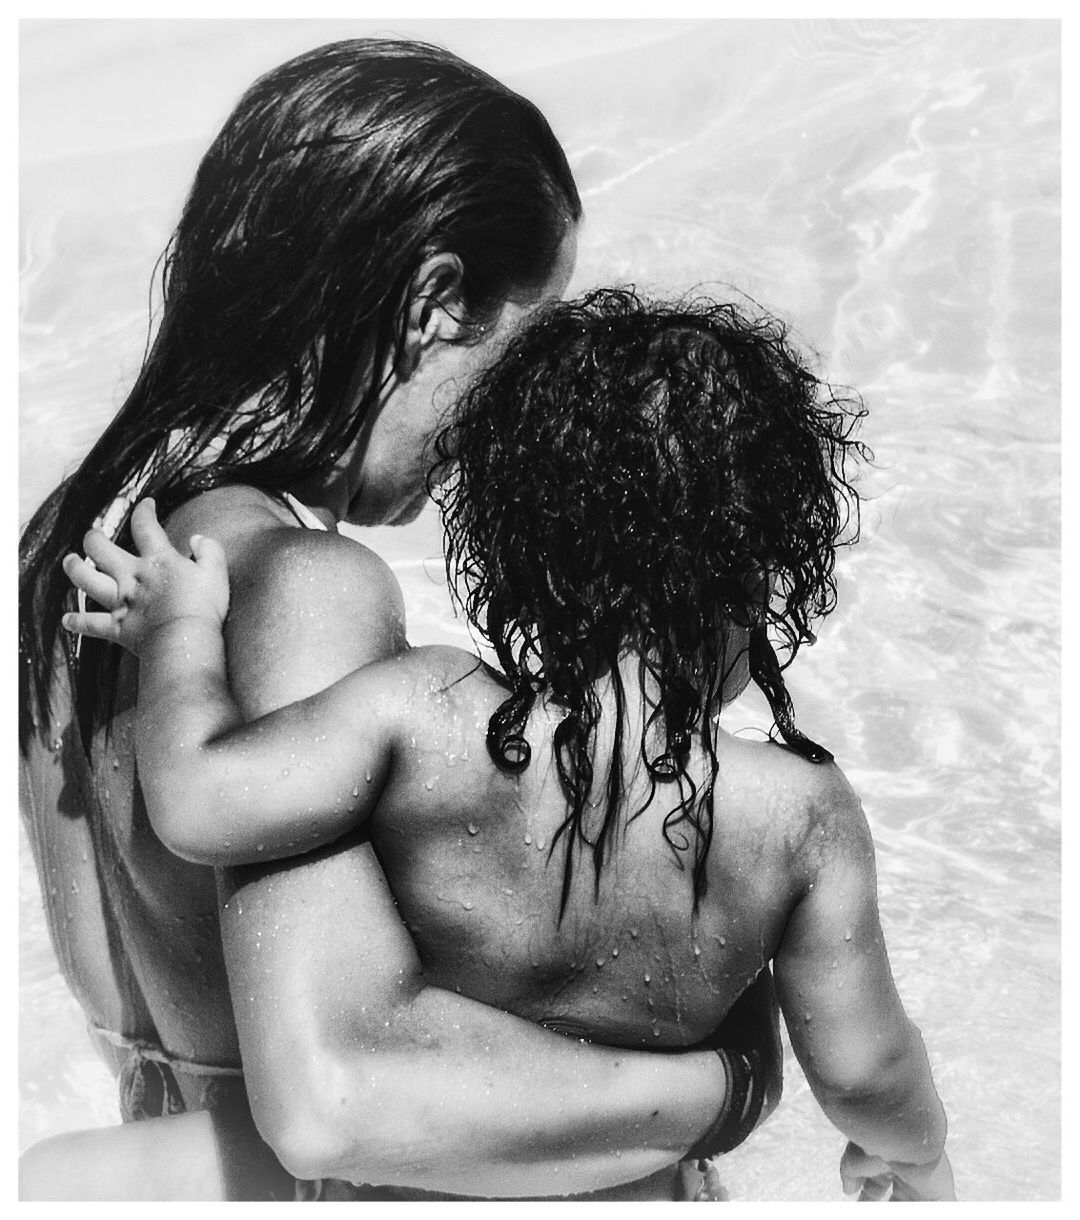 black and white, women, monochrome photography, adult, two people, rear view, togetherness, drawing, person, hairstyle, love, female, emotion, sketch, positive emotion, kissing, men, long hair, young adult, lifestyles, monochrome, auto post production filter, child, transfer print, waist up, nature, bonding, water, embracing, leisure activity, romance, childhood, portrait, back, photo shoot